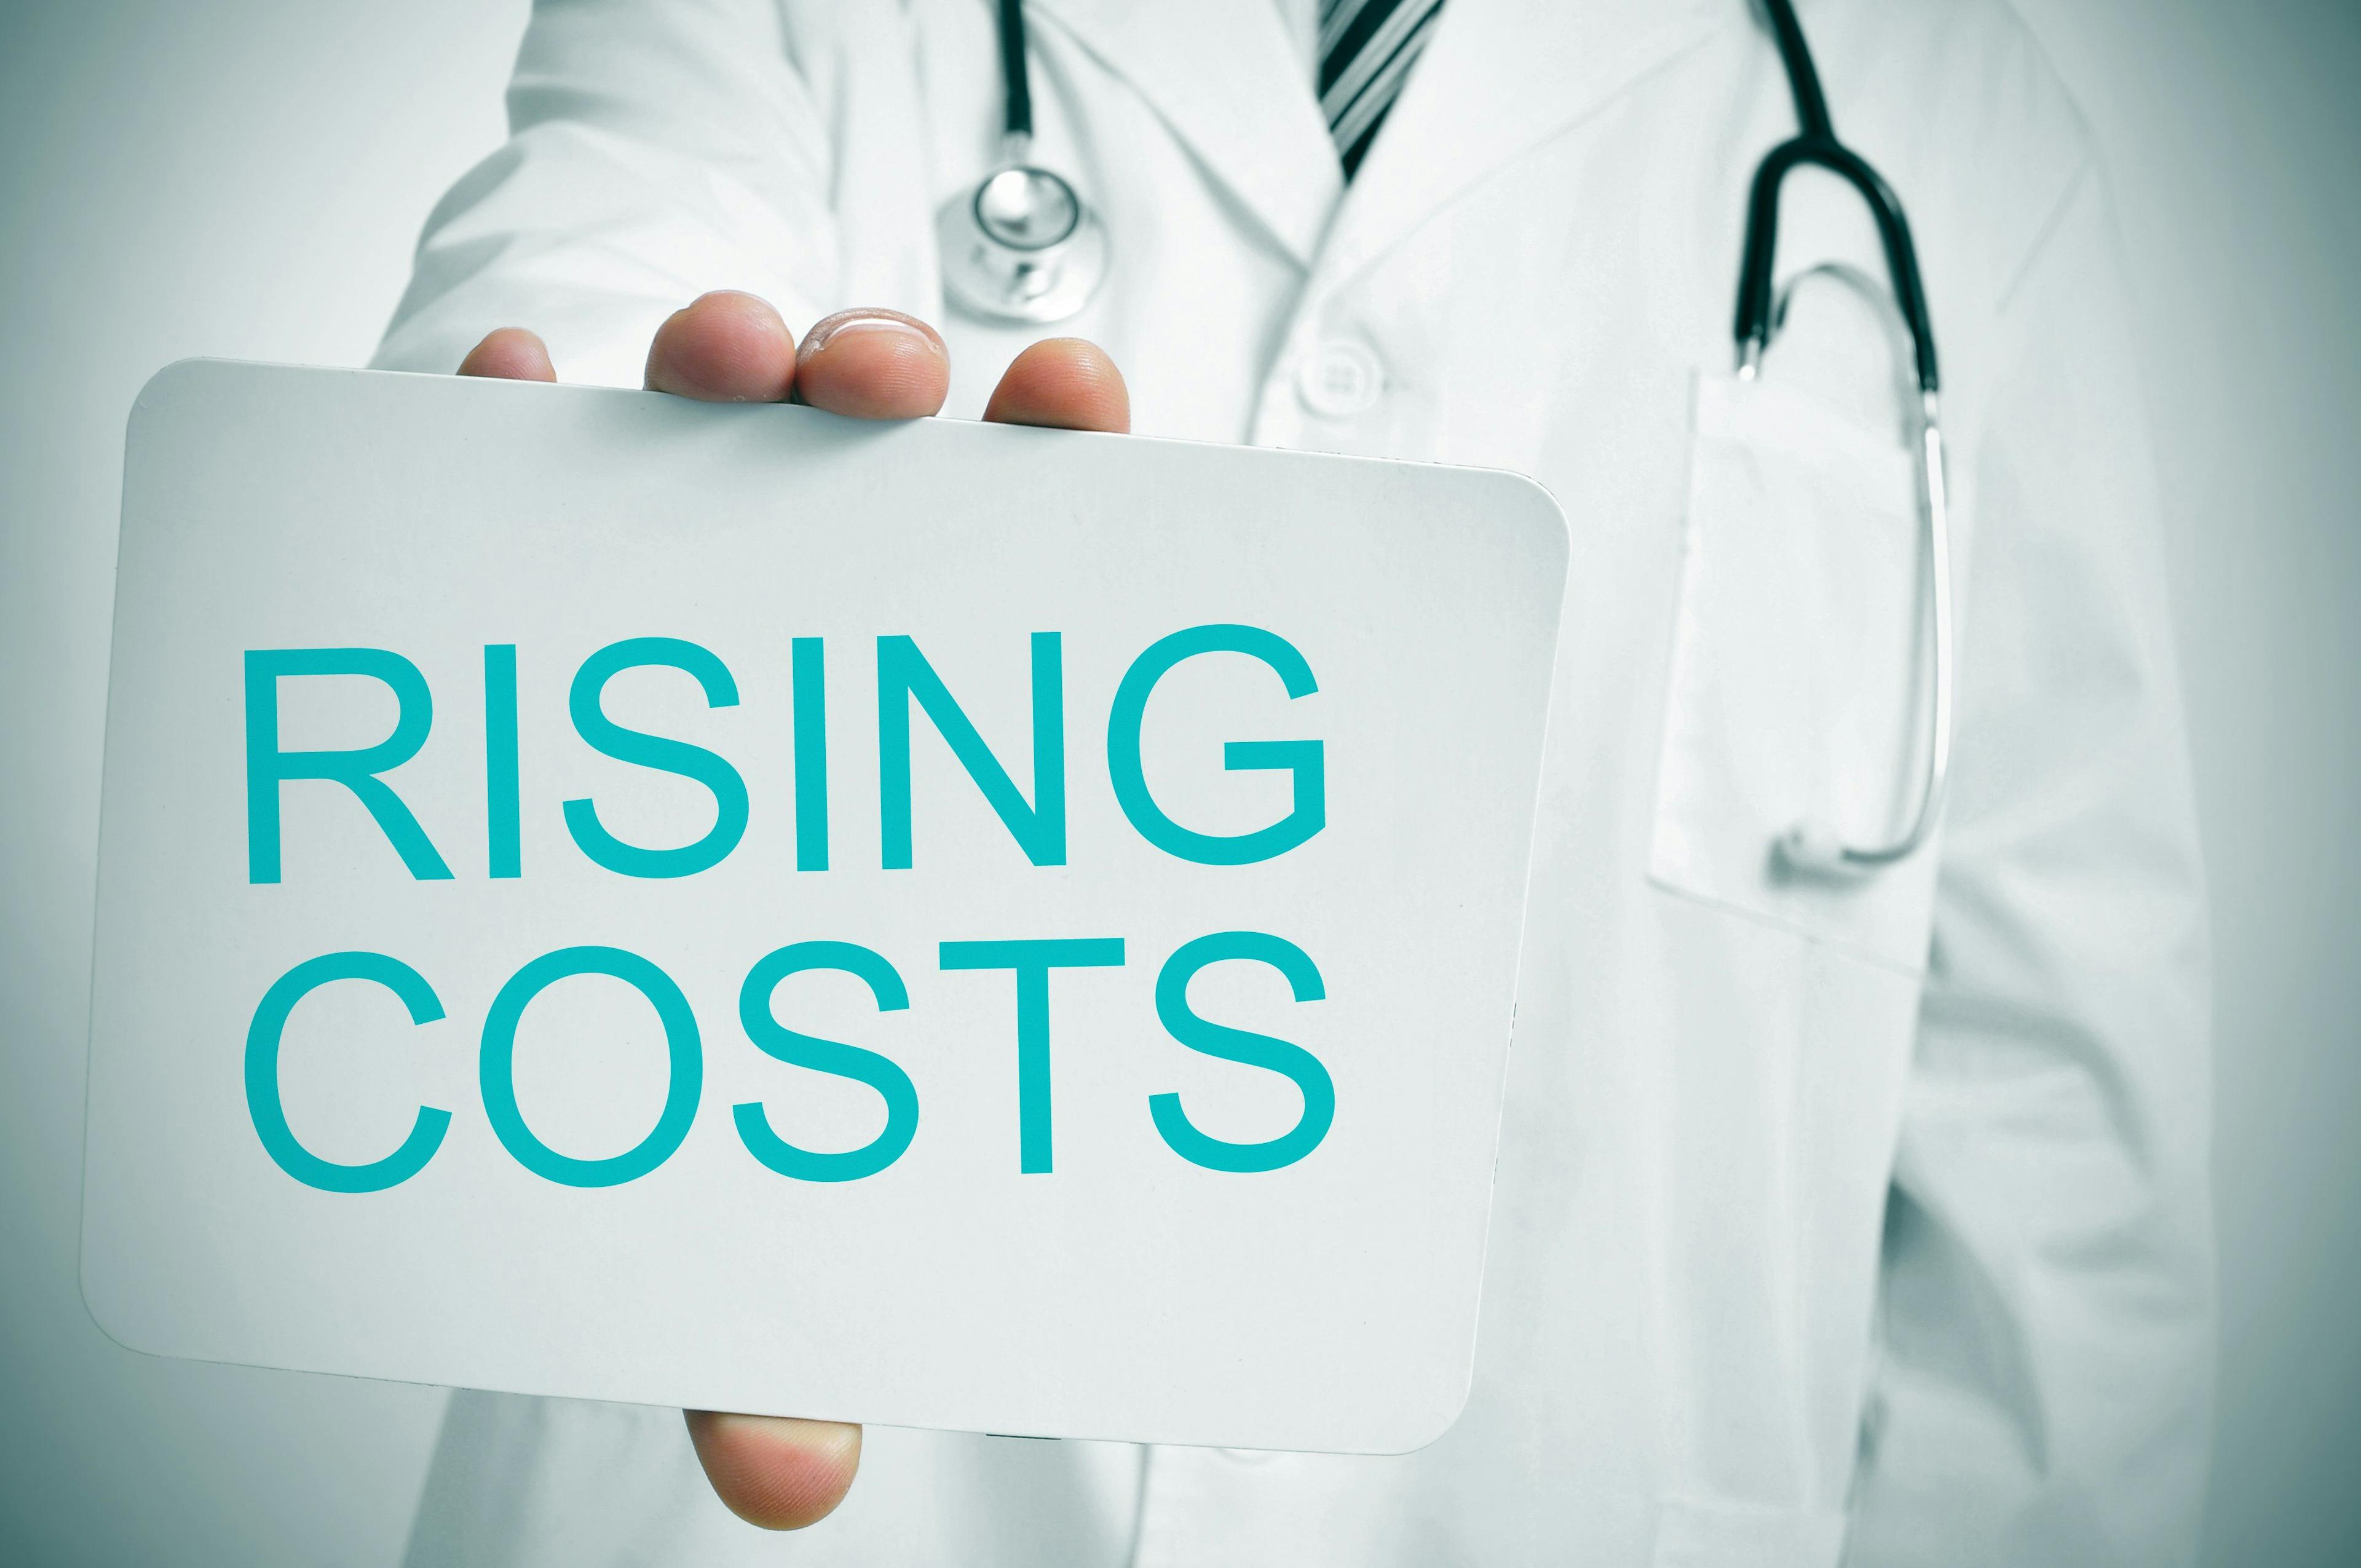 Americans want Congress to take action to stem rising health care costs